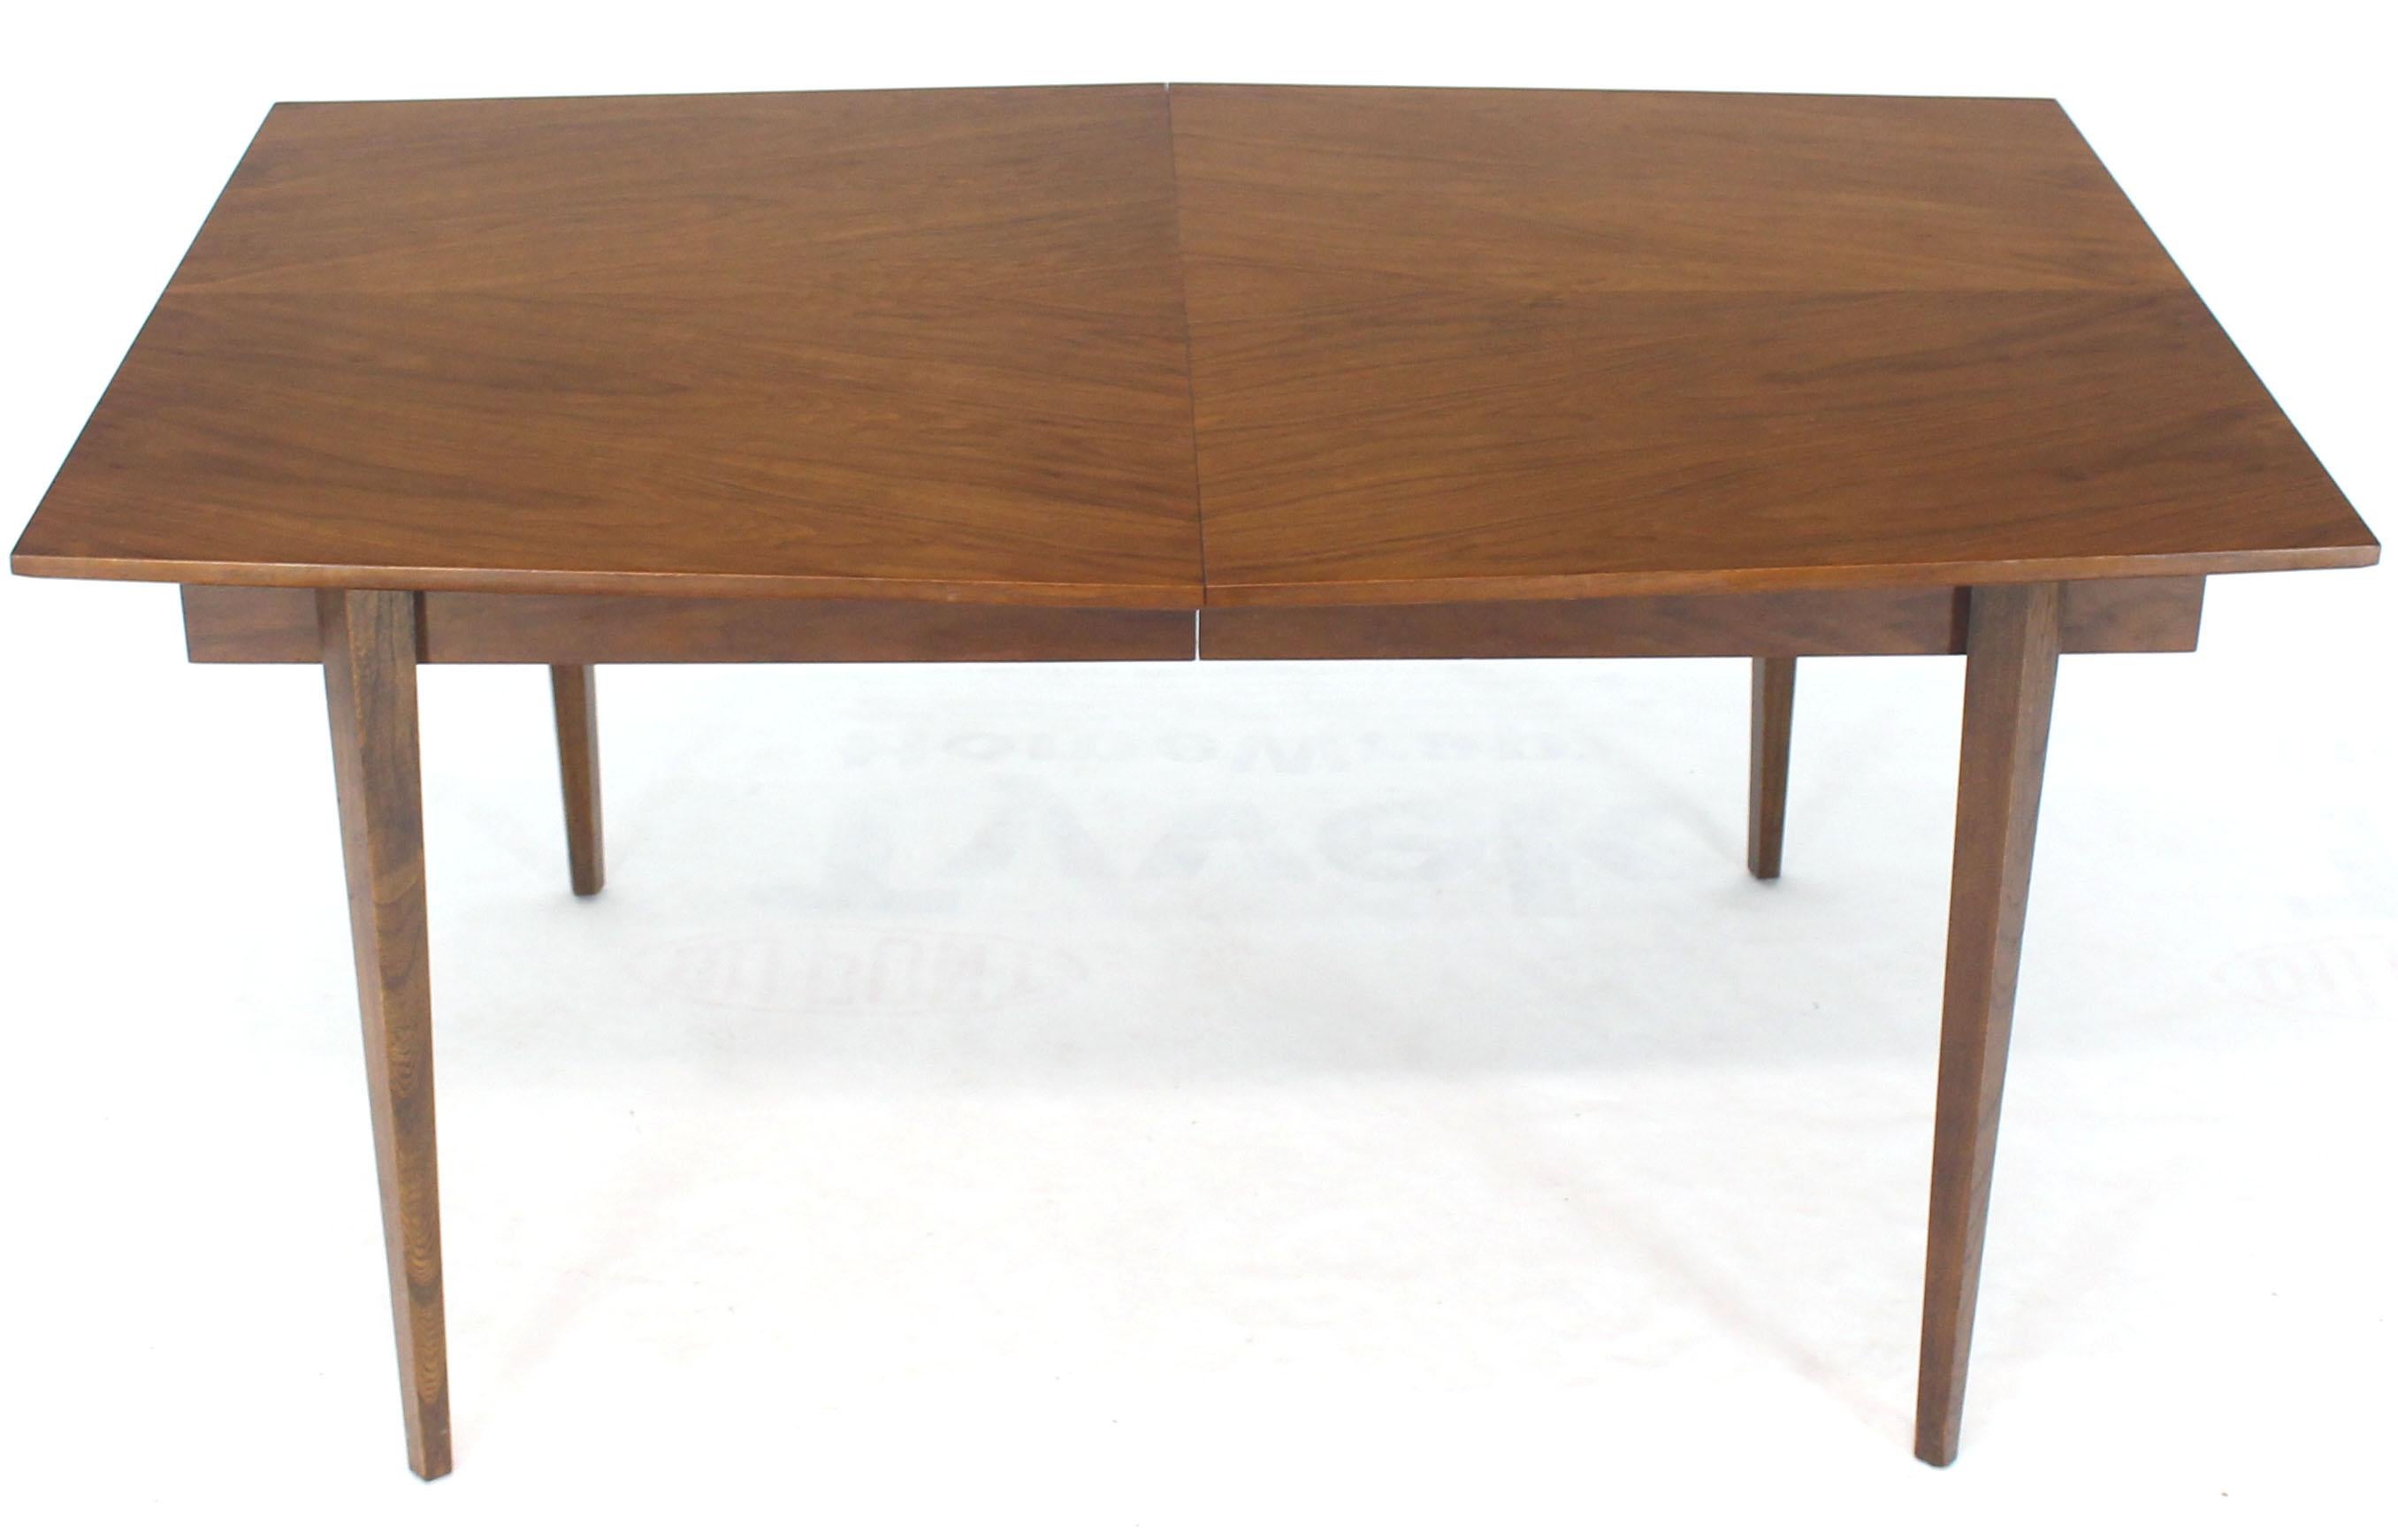 Lacquered Danish Mid-Century Modern Walnut Wide Rectangle Dining Table 2 Extension Boards For Sale